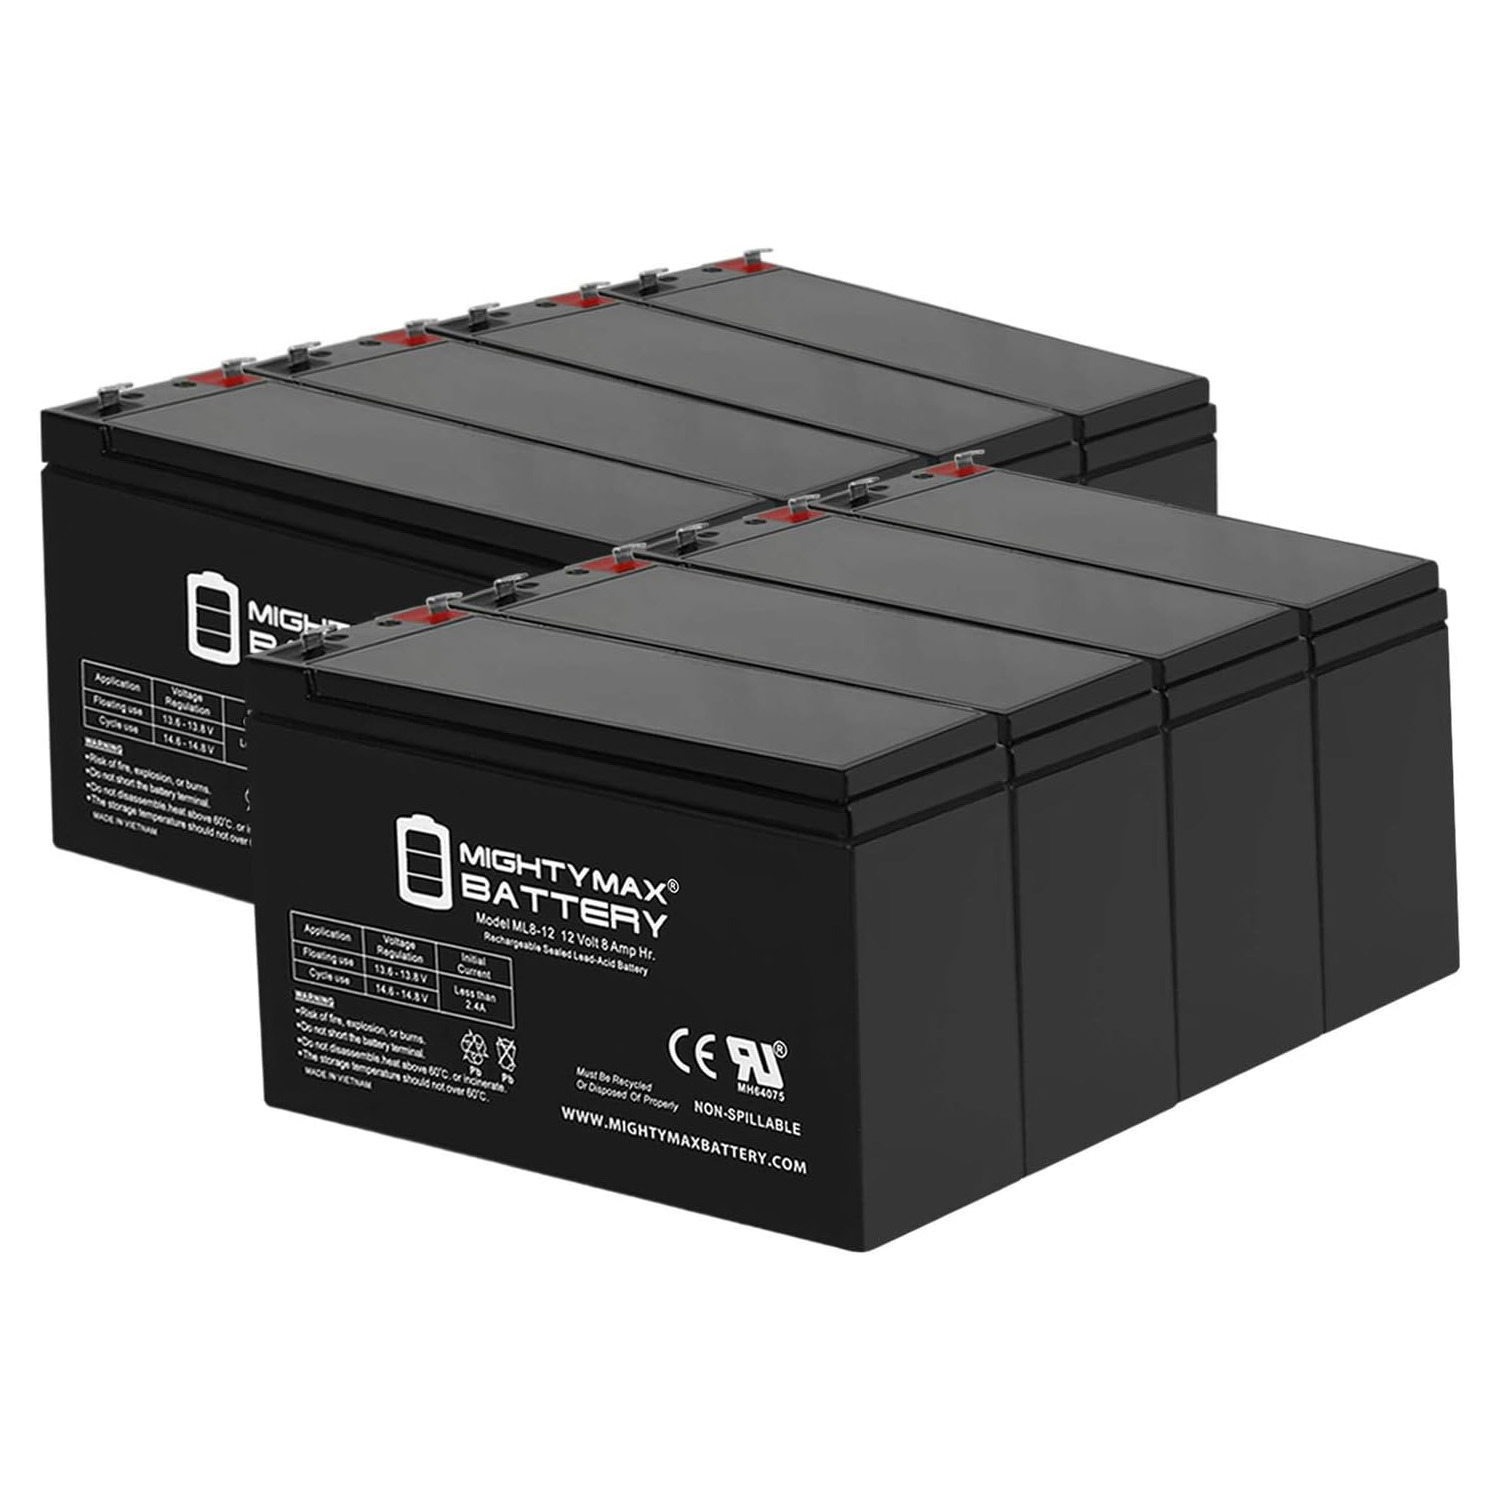 12V 8Ah Battery Replacement for Emerson PSP350MT - 8 Pack